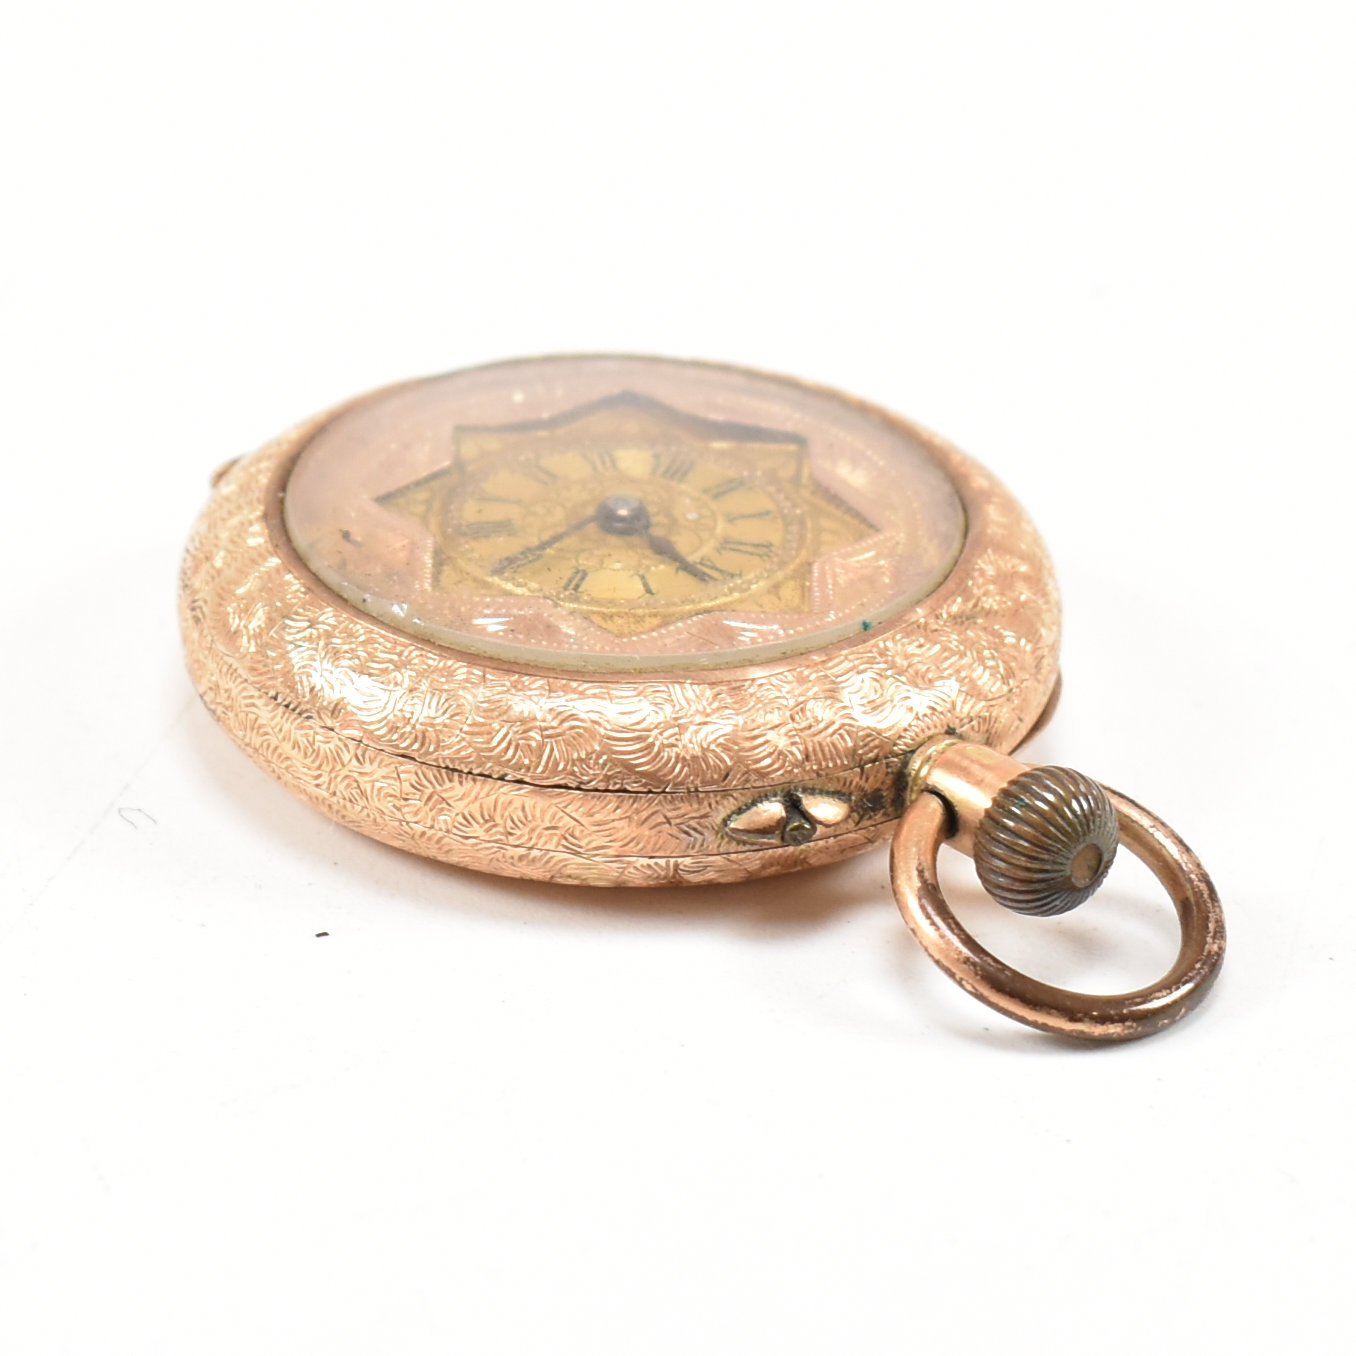 14CT GOLD OPEN FACED CROWN WIND POCKET FOB WATCH - Image 3 of 8